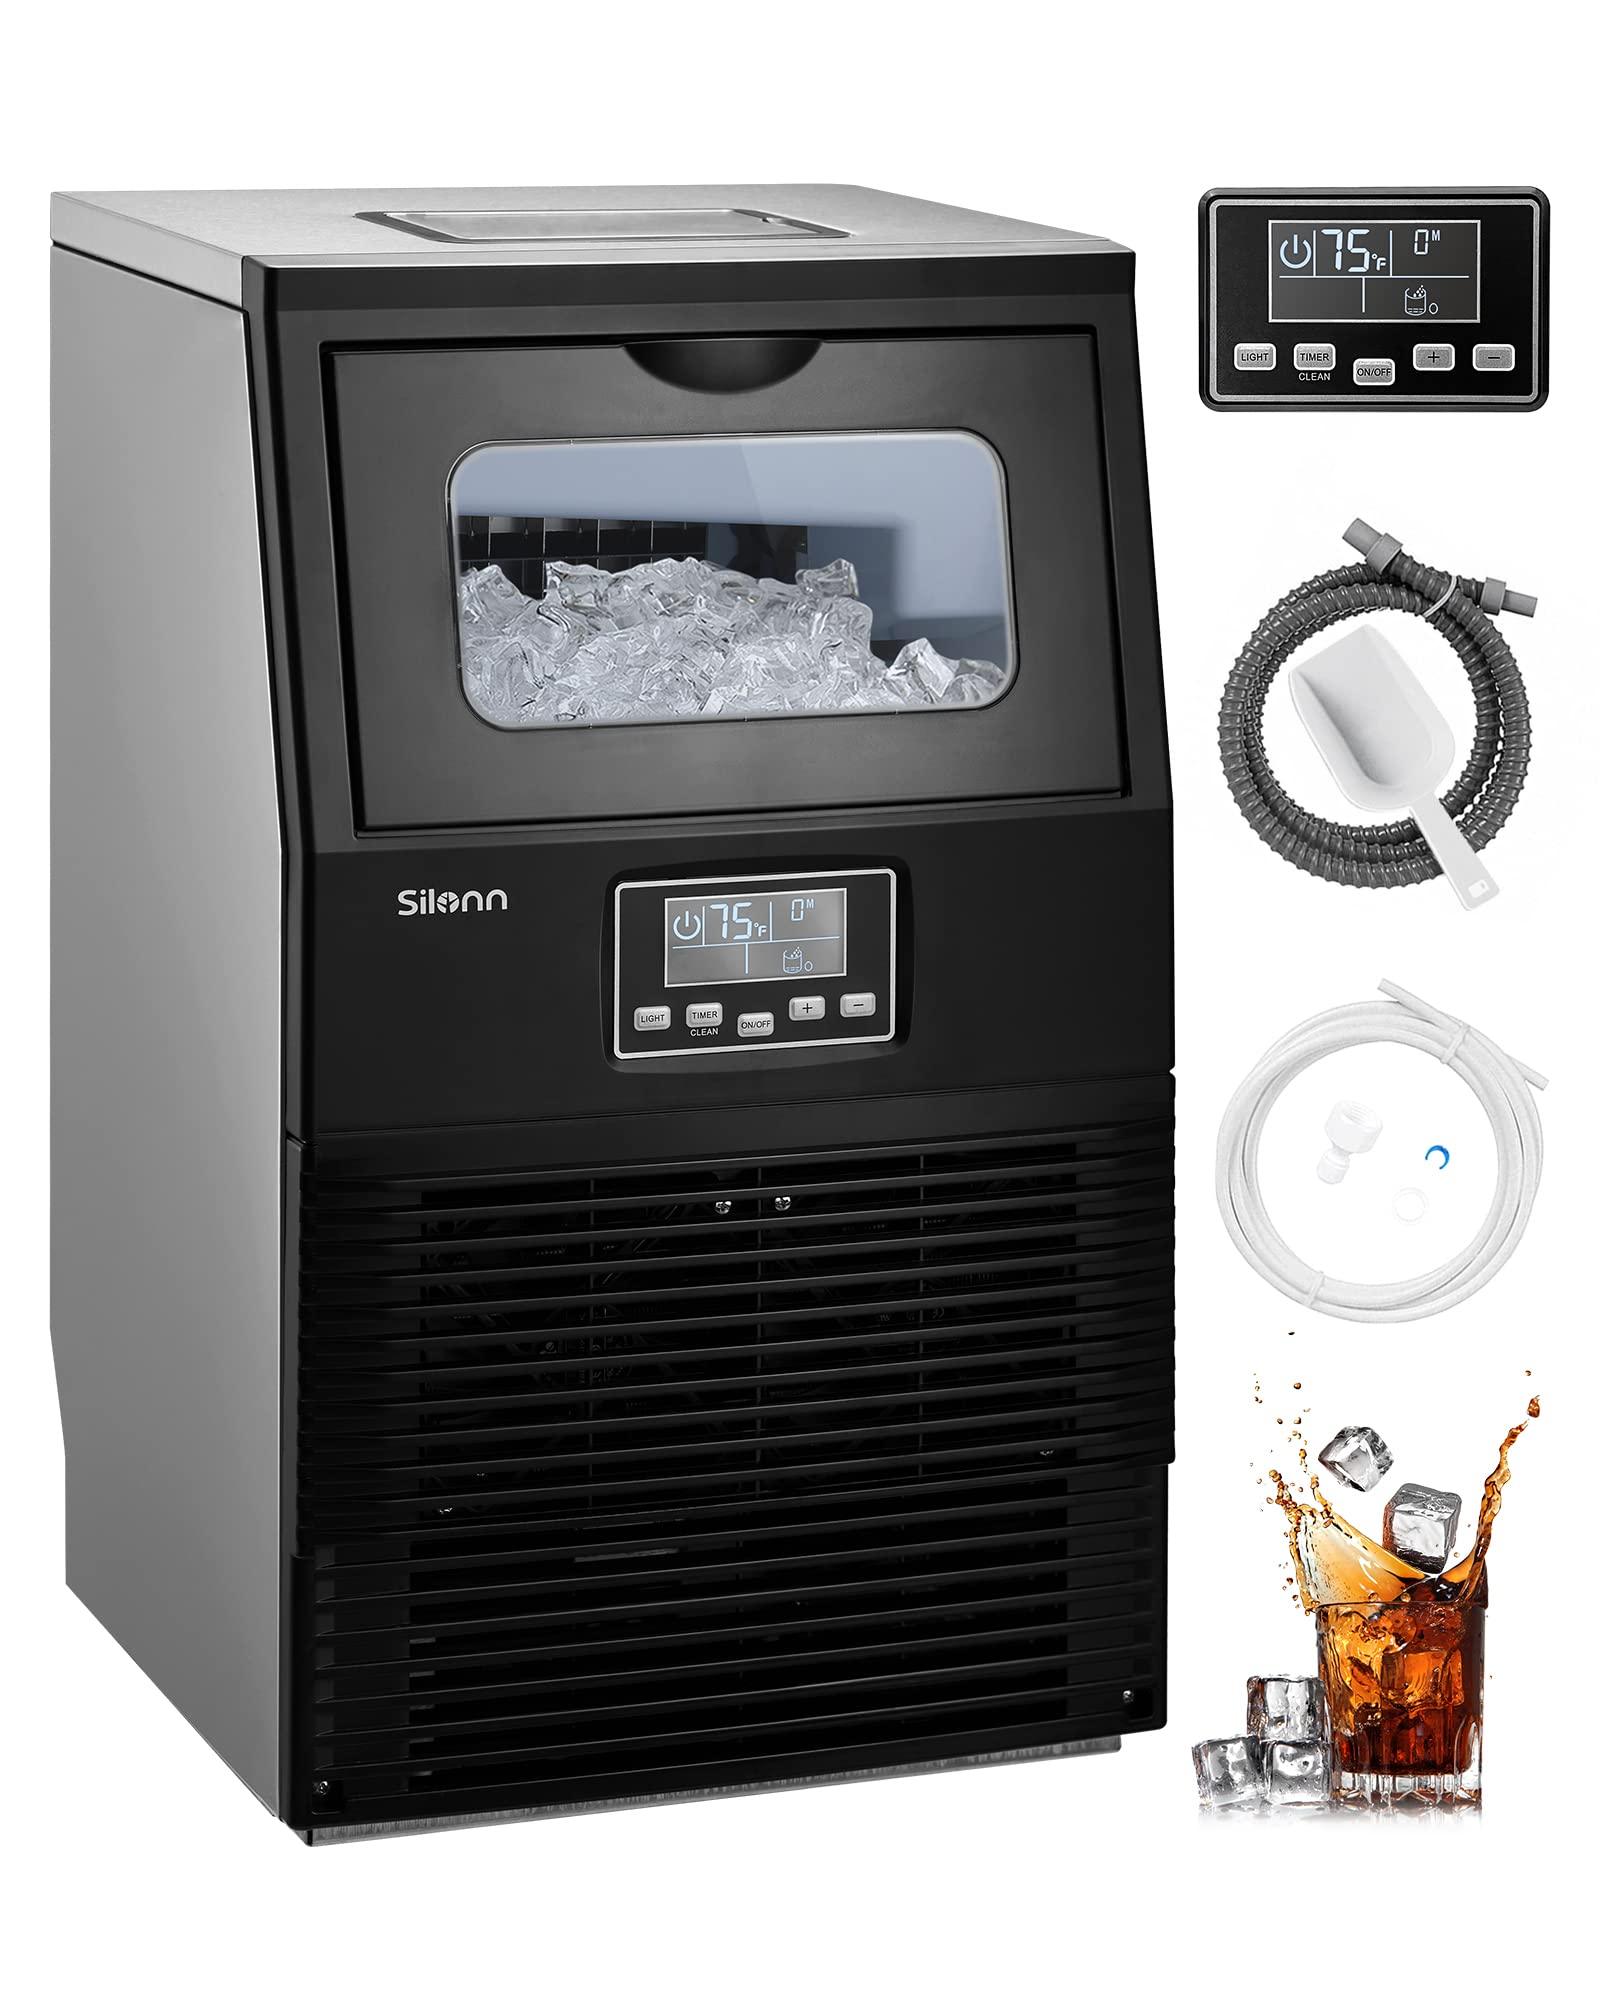 Silonn Commercial Ice Maker Machine, 84LBS/24H, Full Heavy Duty Stainless Steel Construction, Self-Cleaning, Clear Cube for Home Bar, Include Scoop, Connection Hose - CookCave